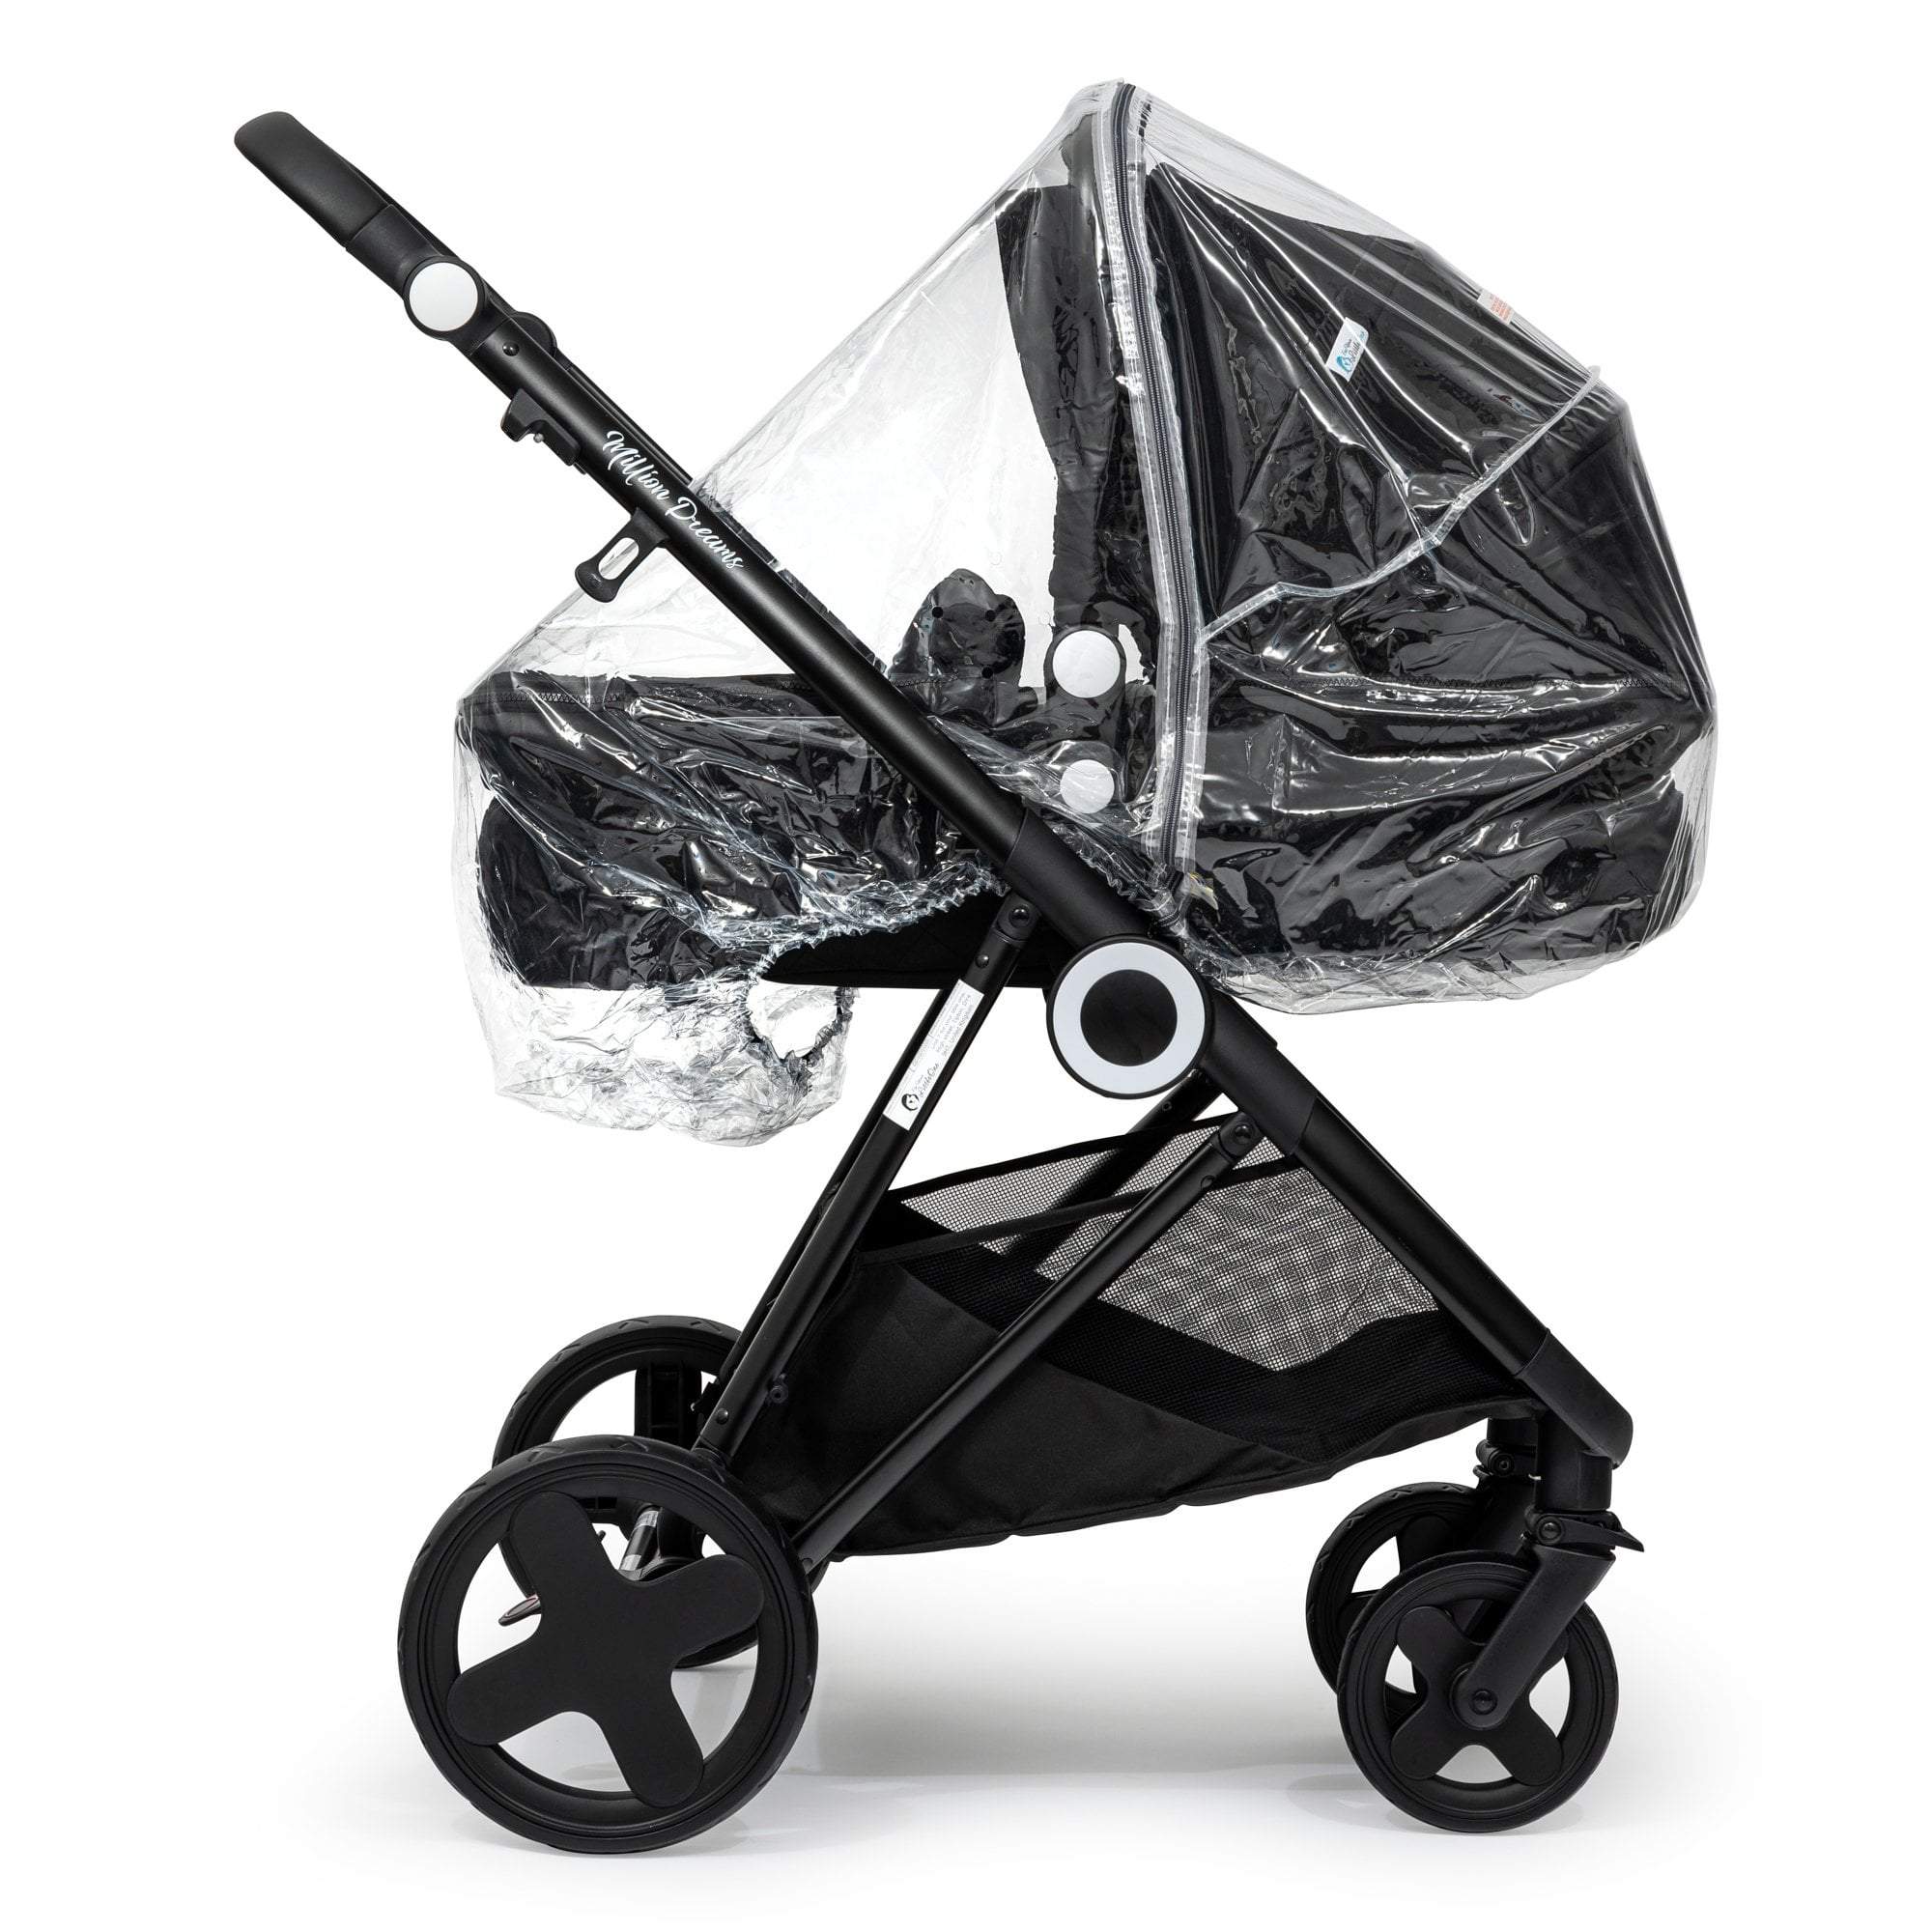 Carrycot Raincover Compatible With Quinny - Fits All Models - For Your Little One